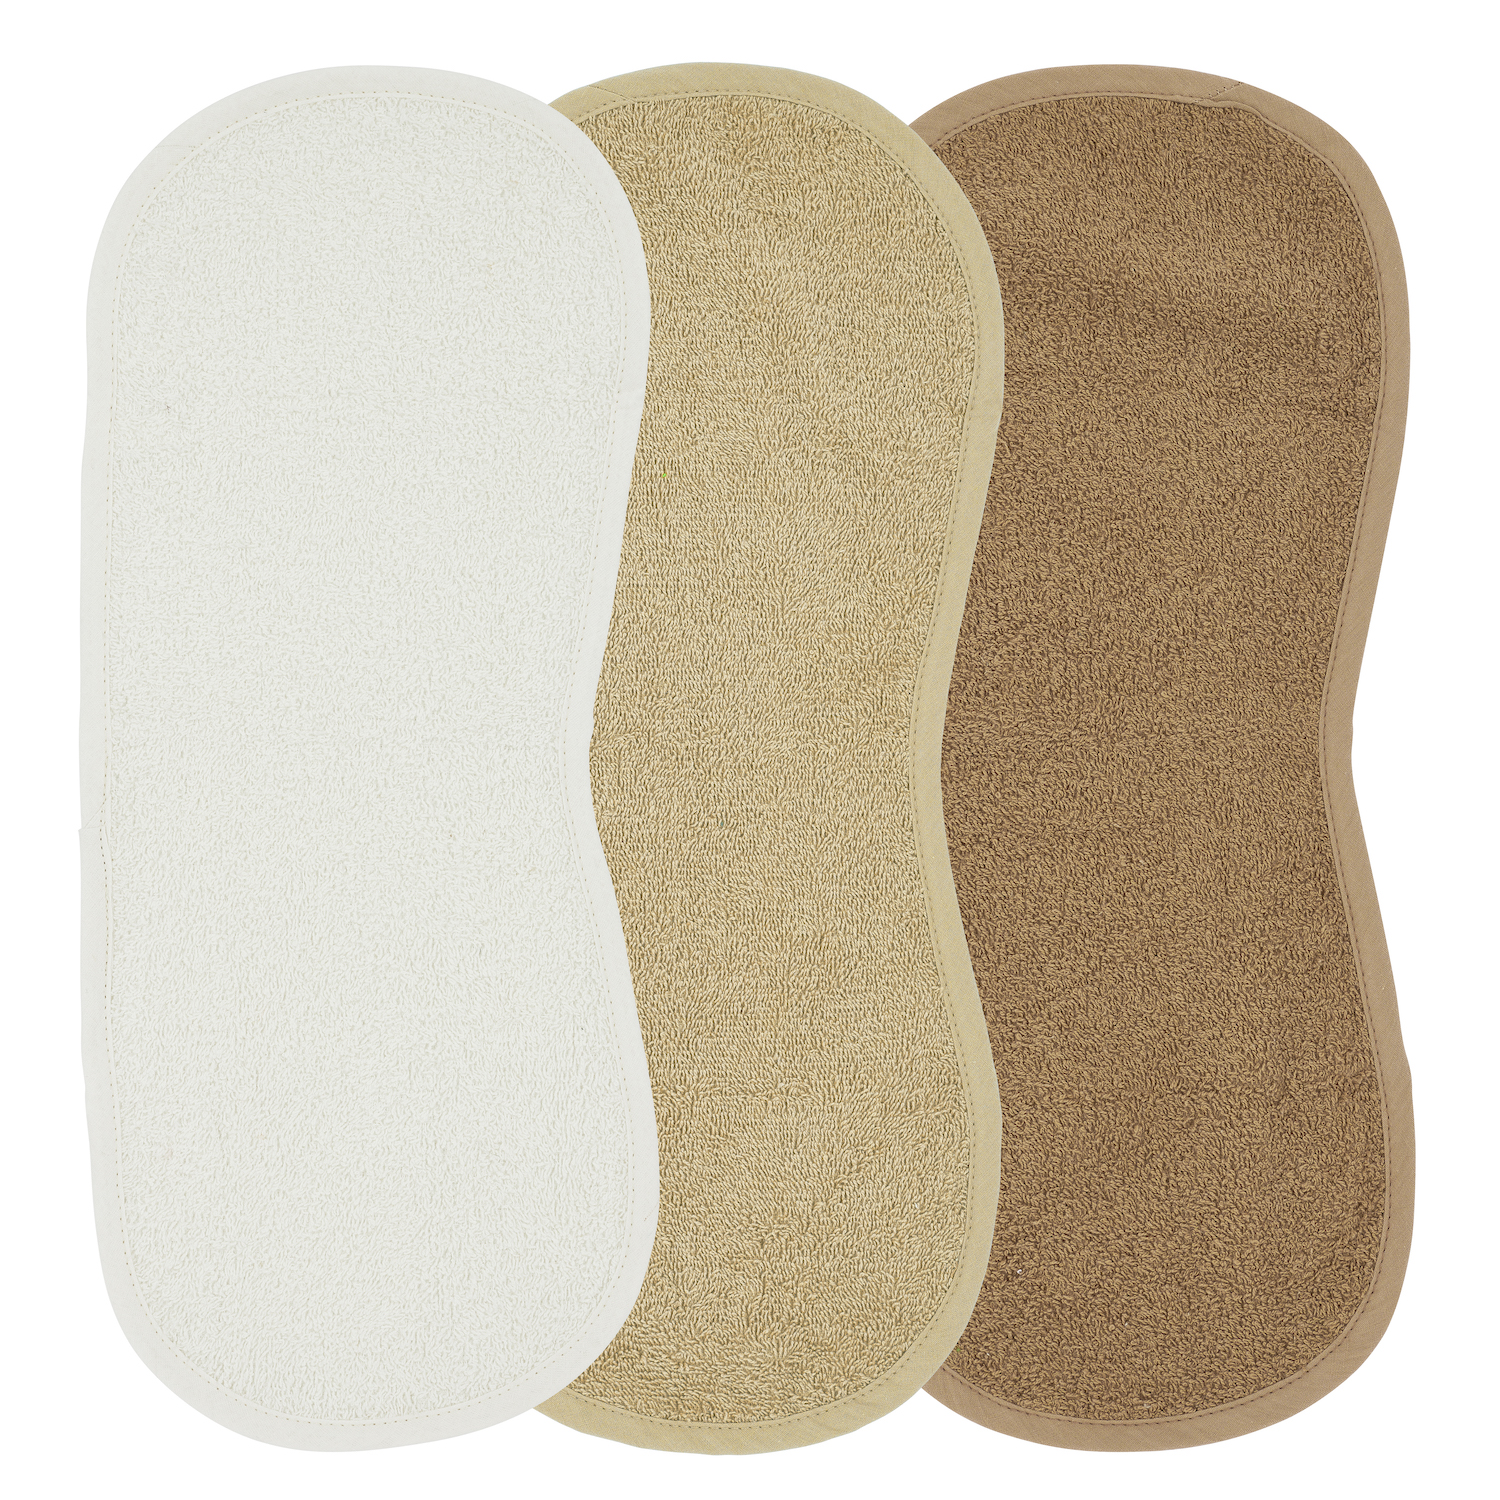 Basic Terry Burp Cloths Shoulder Model 3-pack  - Offwhite/Sand/Toffee - 53x20cm